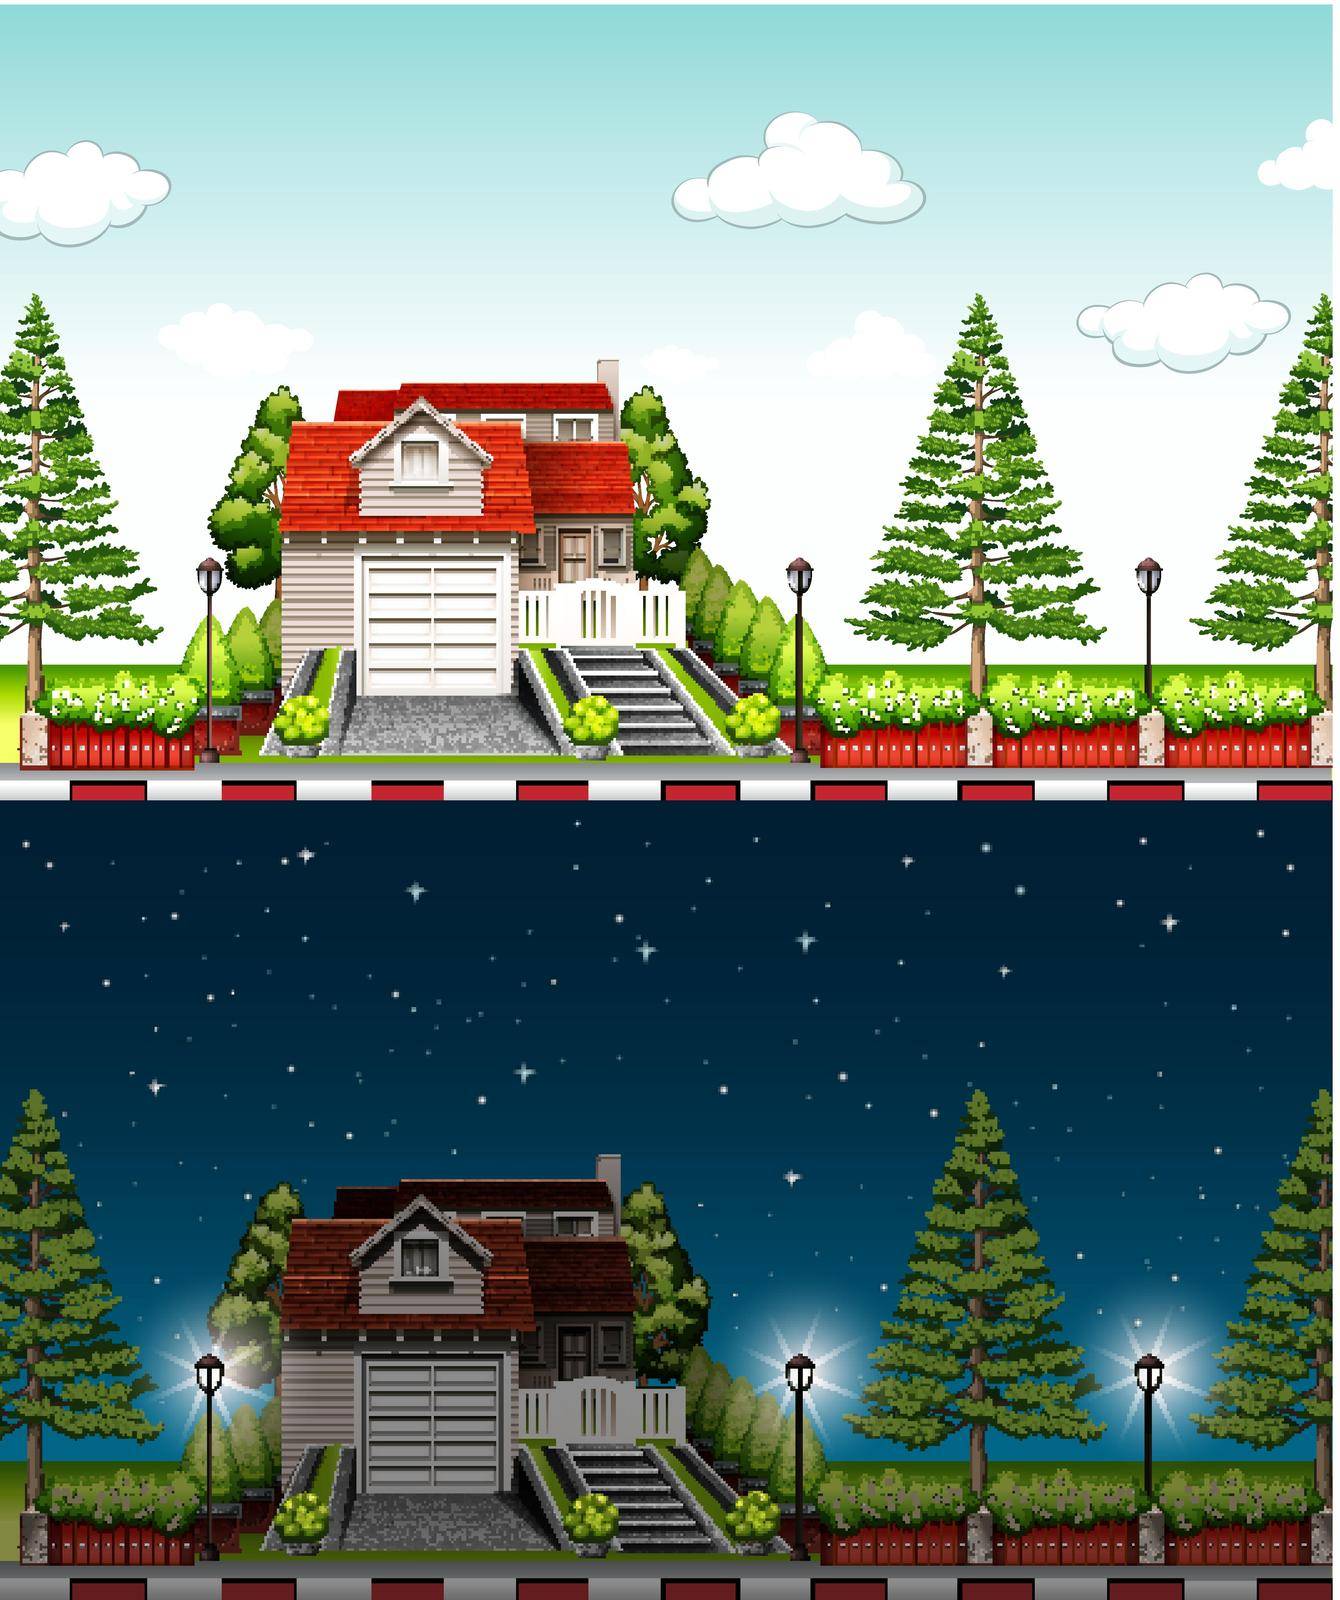 Private house at day time and night time by iimages